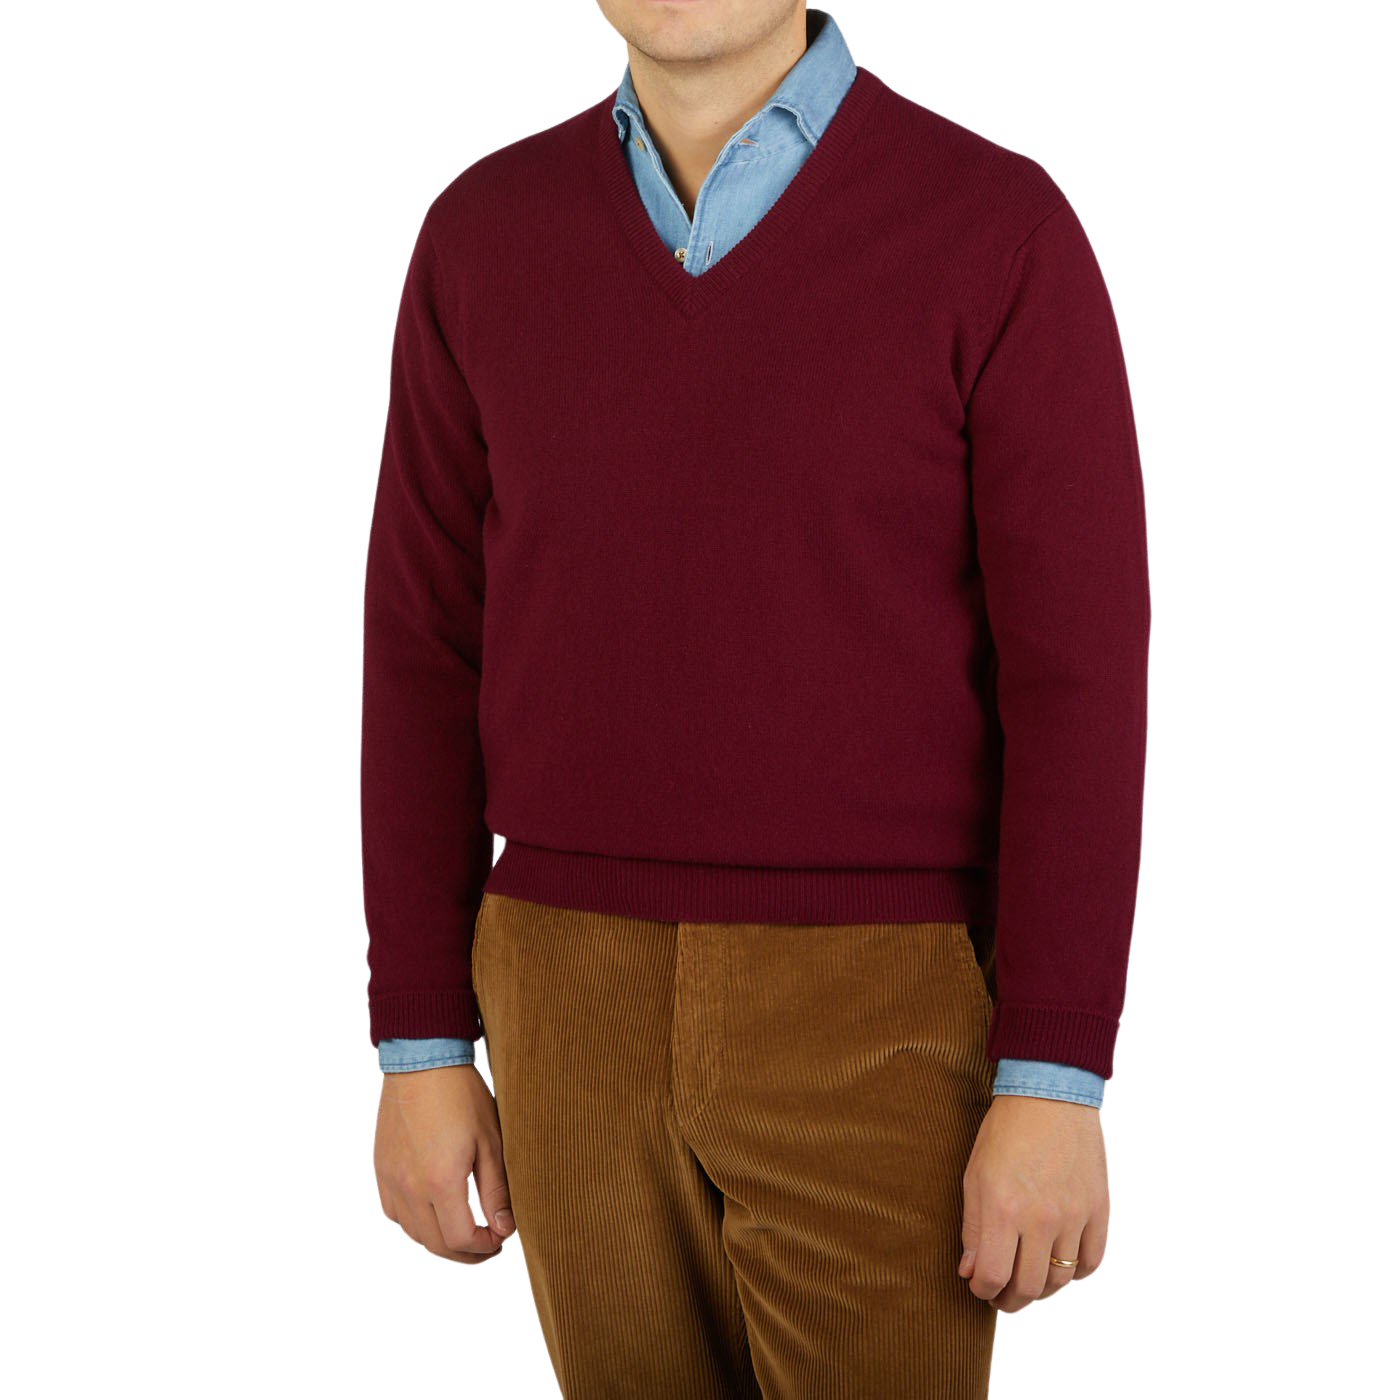 A man wearing a comfy Bordeaux V-Neck Lambswool sweater by William Lockie.